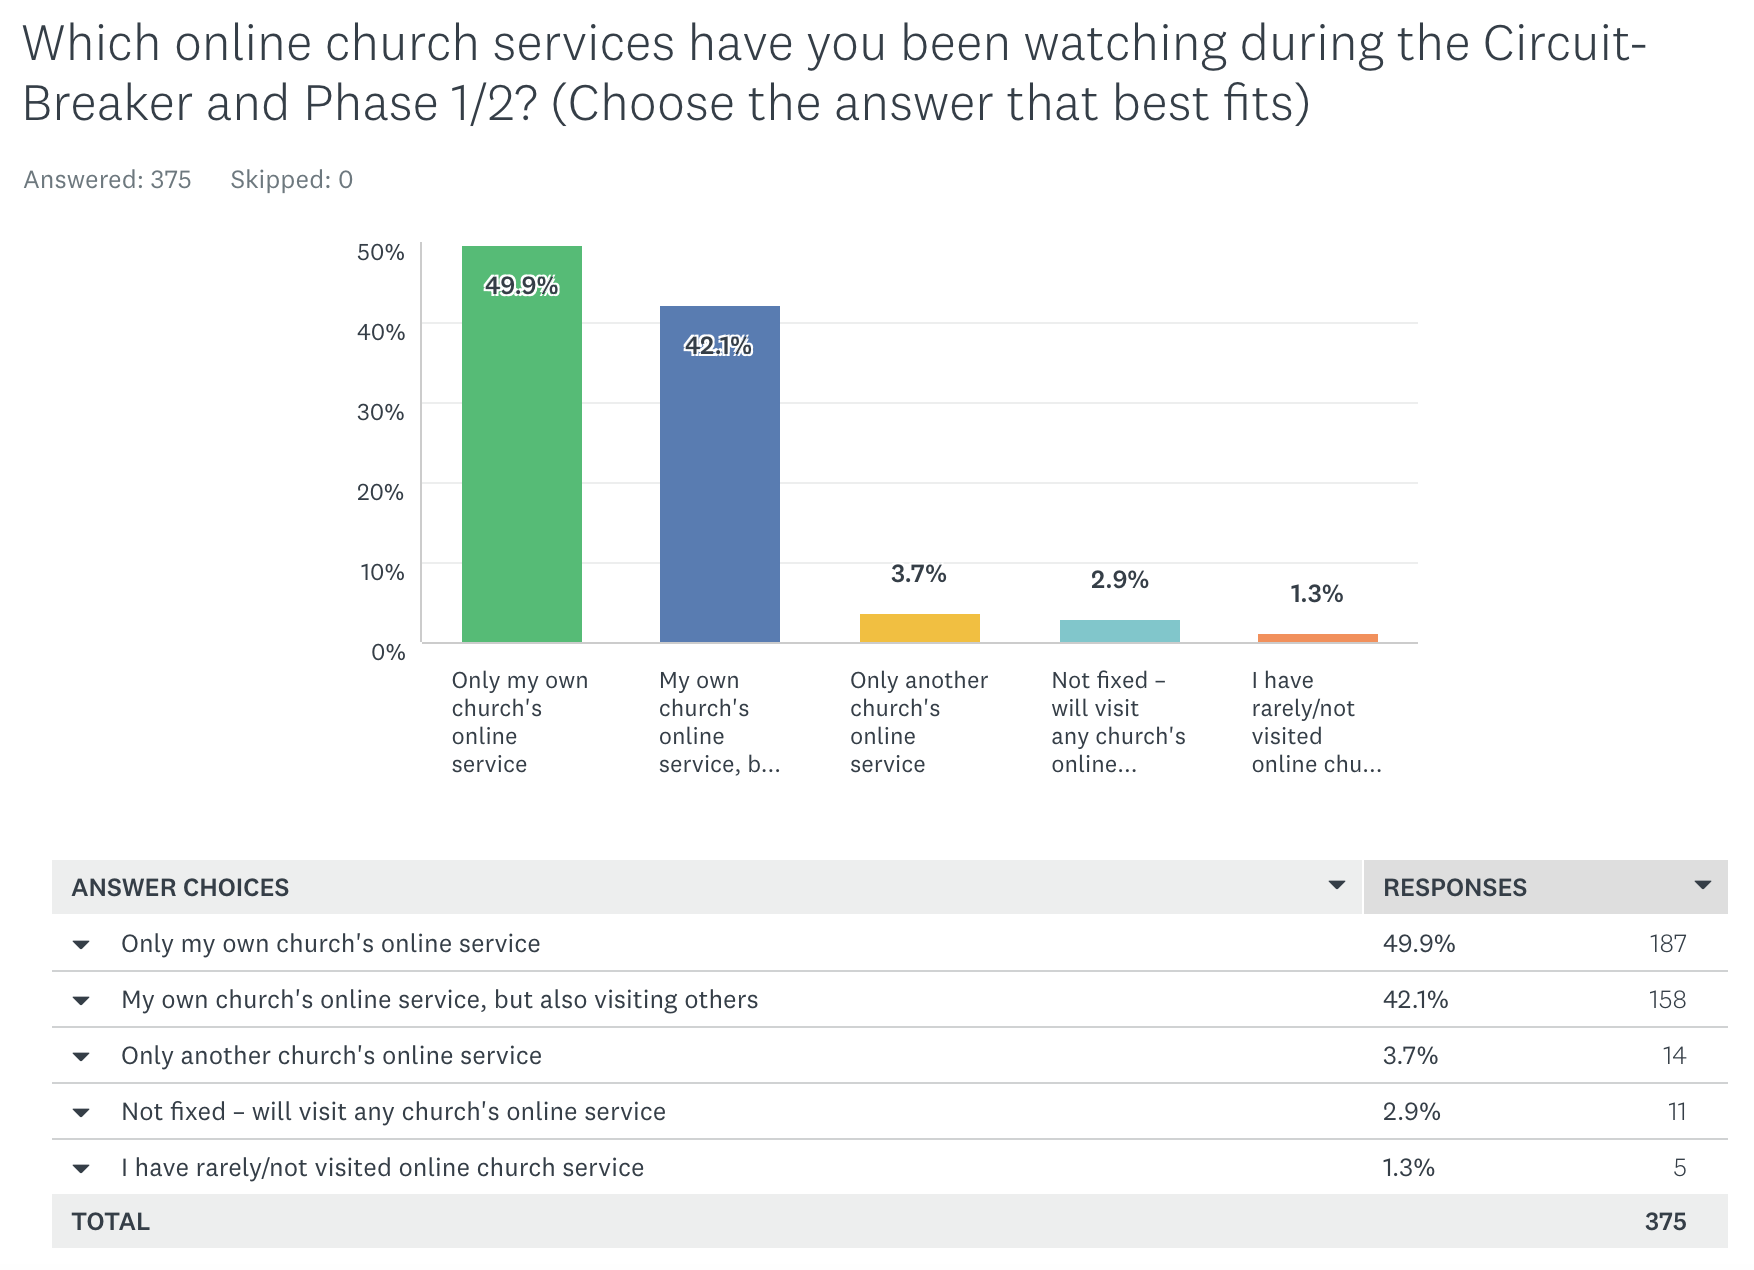 Which online church services have you been watching?